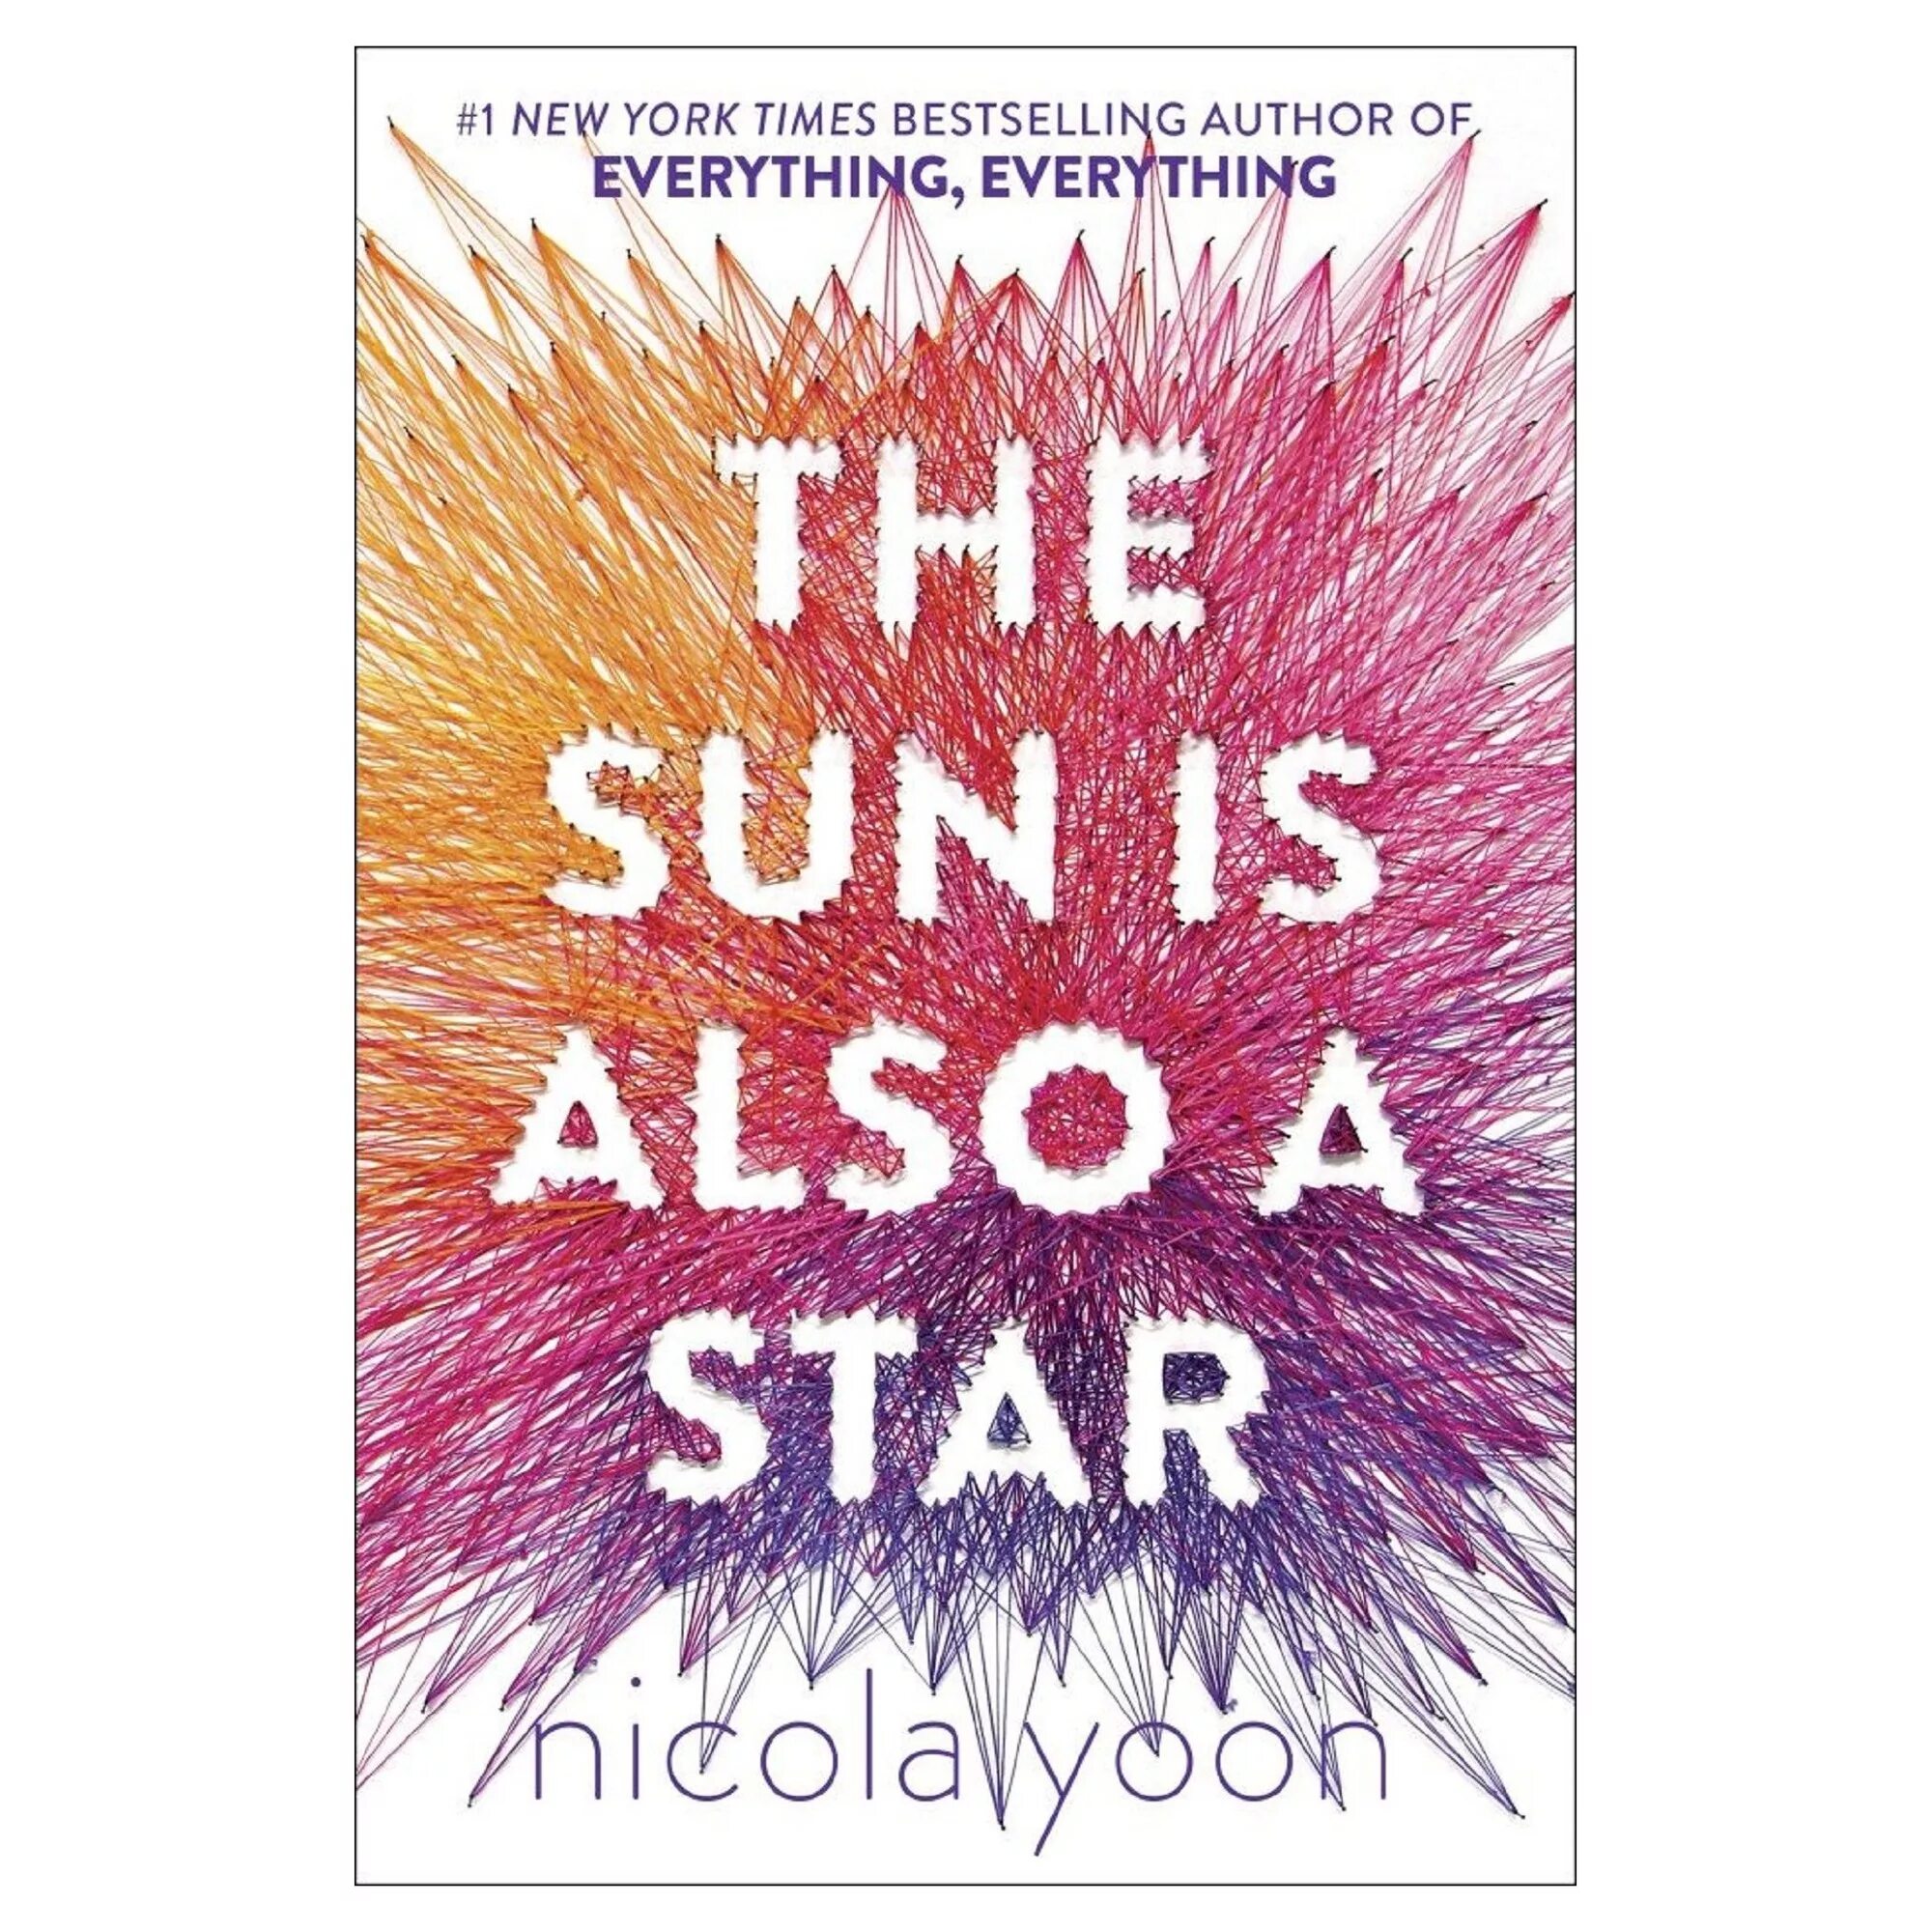 Everything is also. The Sun is also a Star book. Nicola Yoon книги. Солнце тоже звезда книга. The Sun is also a Star book Award.